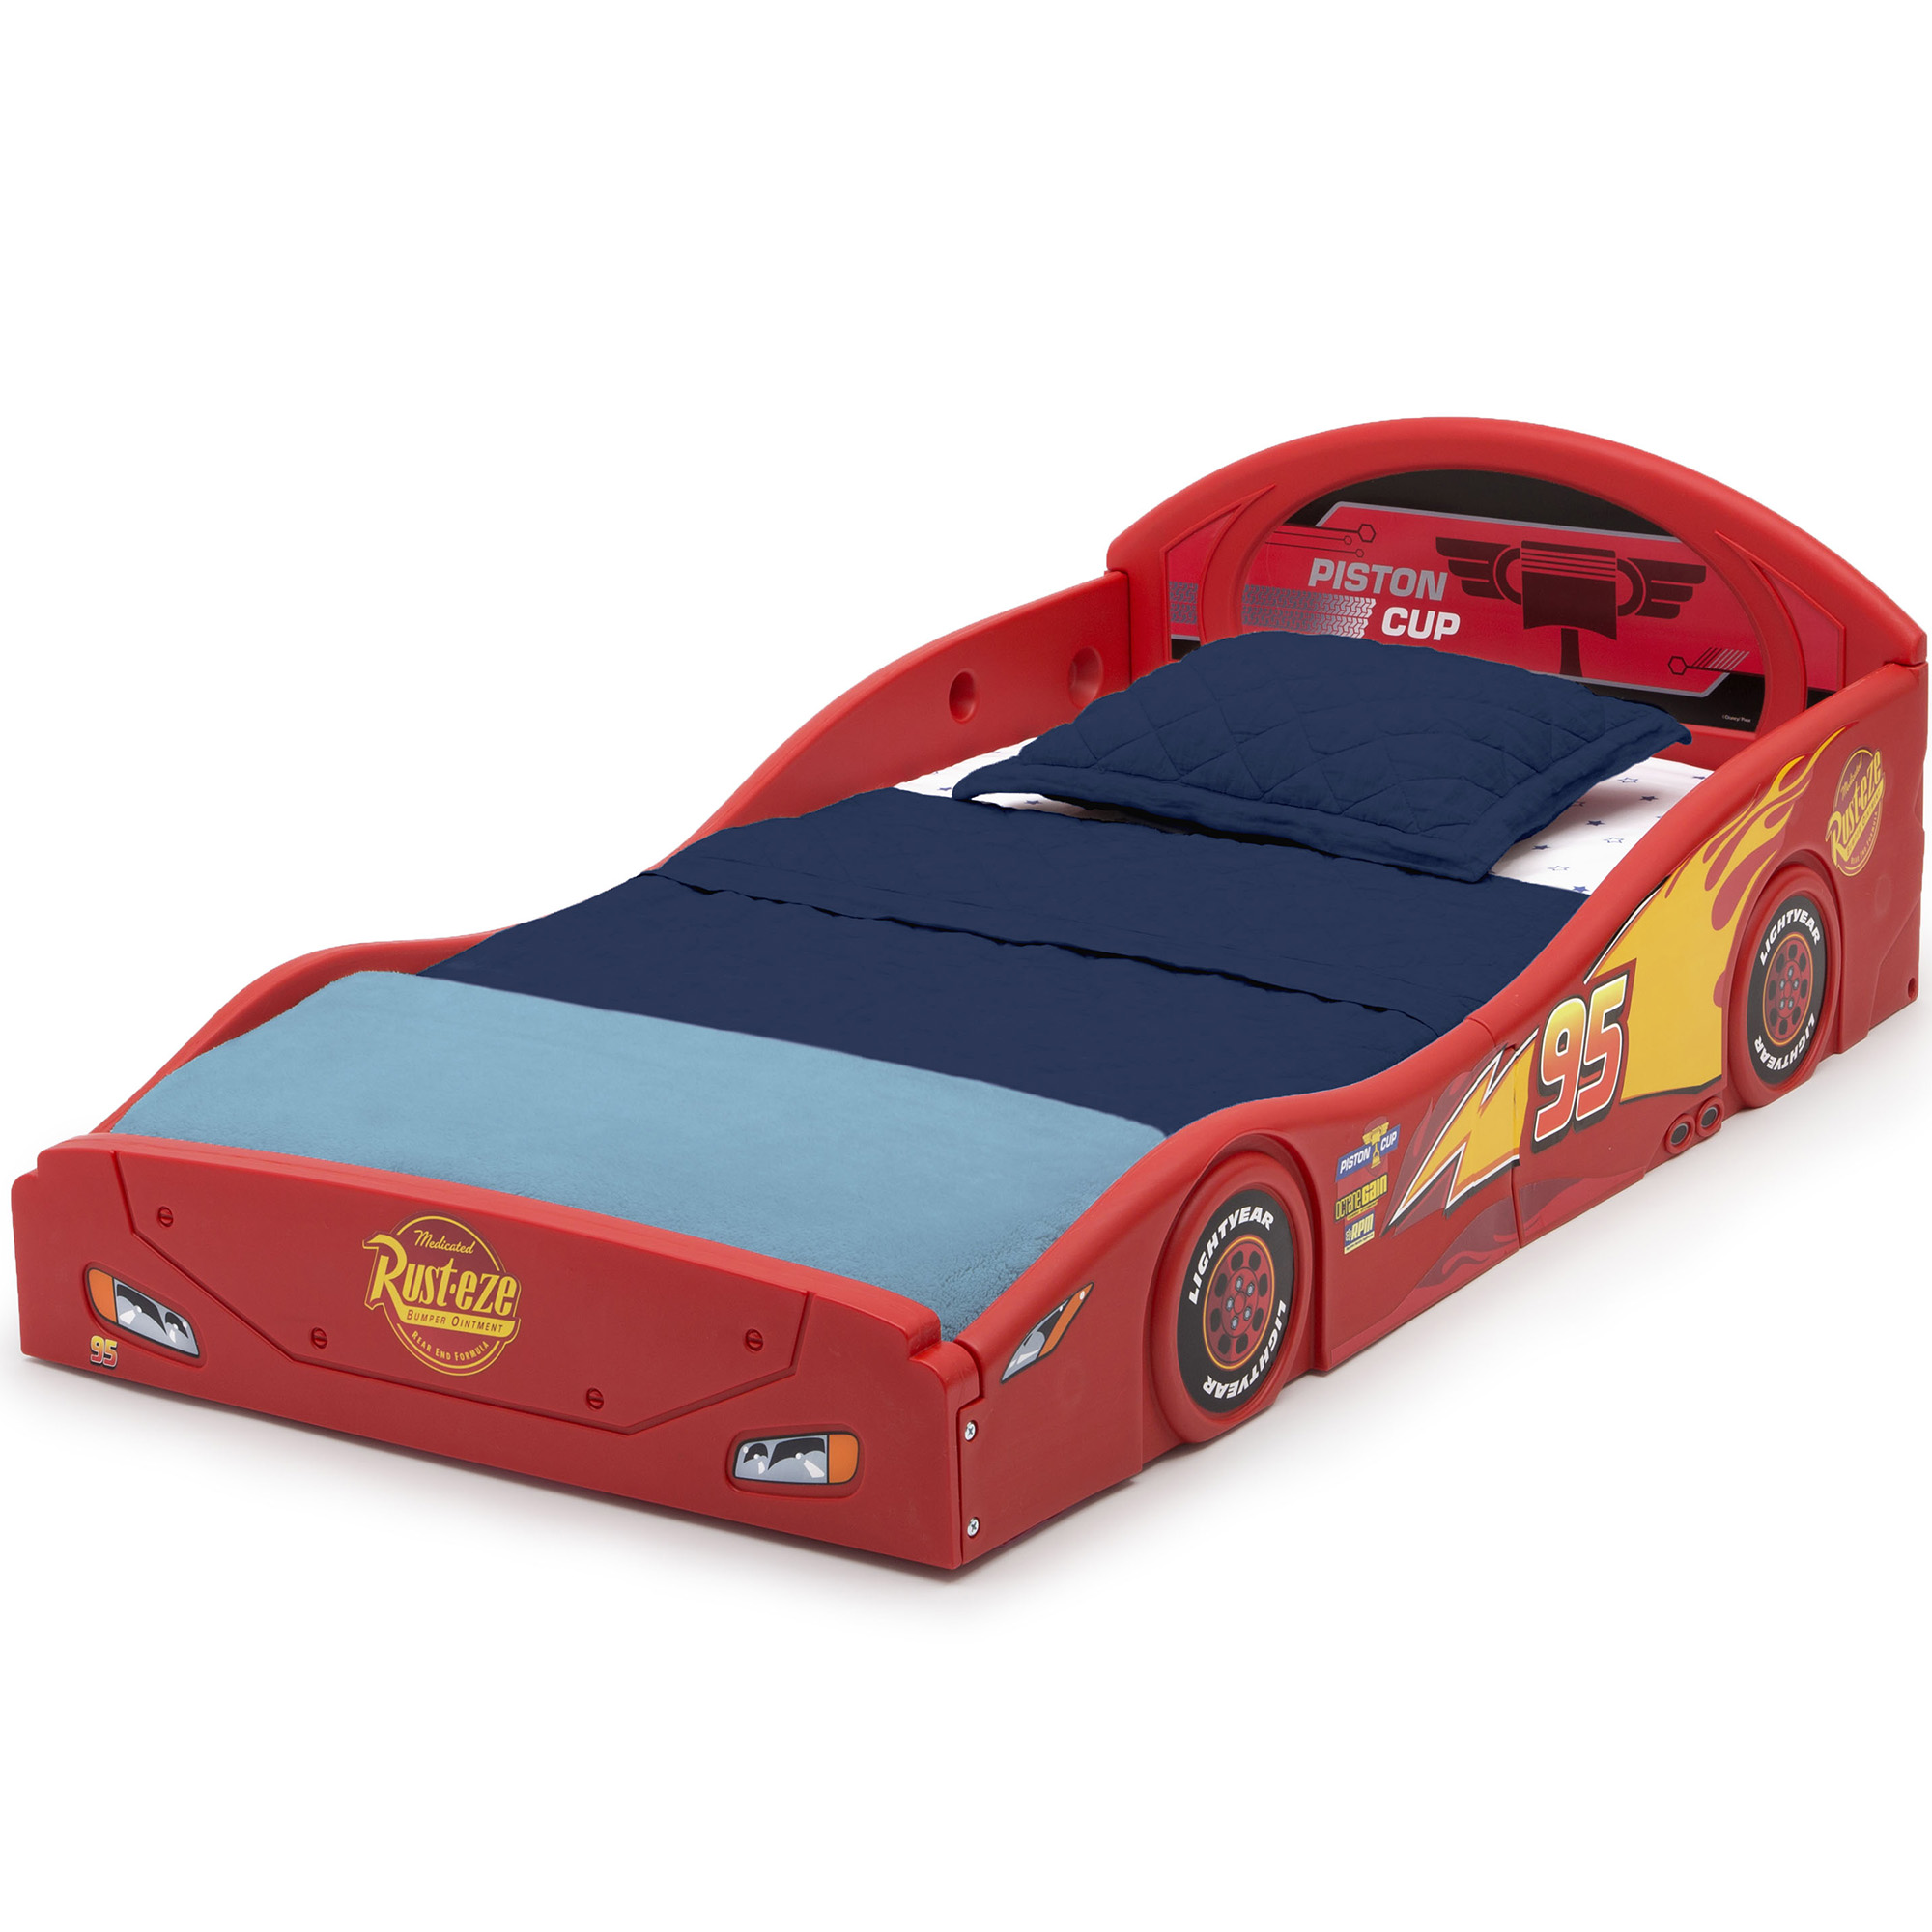 Disney Pixar Cars Lightning McQueen Plastic Sleep and Play Toddler Bed by Delta Children - image 2 of 6